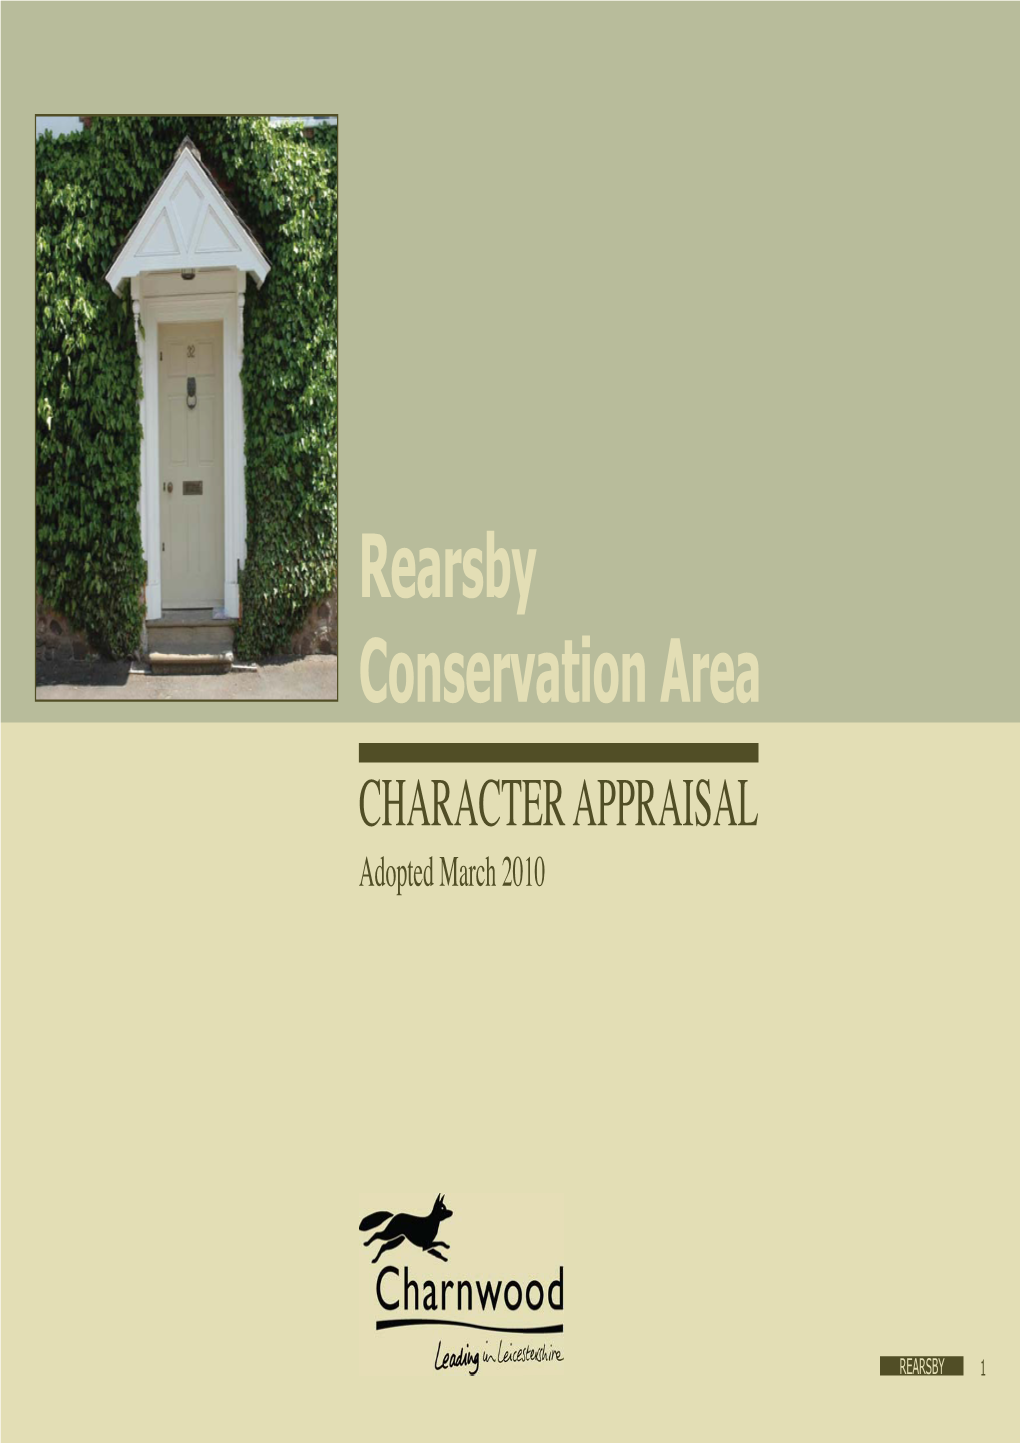 Rearsby Conservation Area Illustrated Appraisal